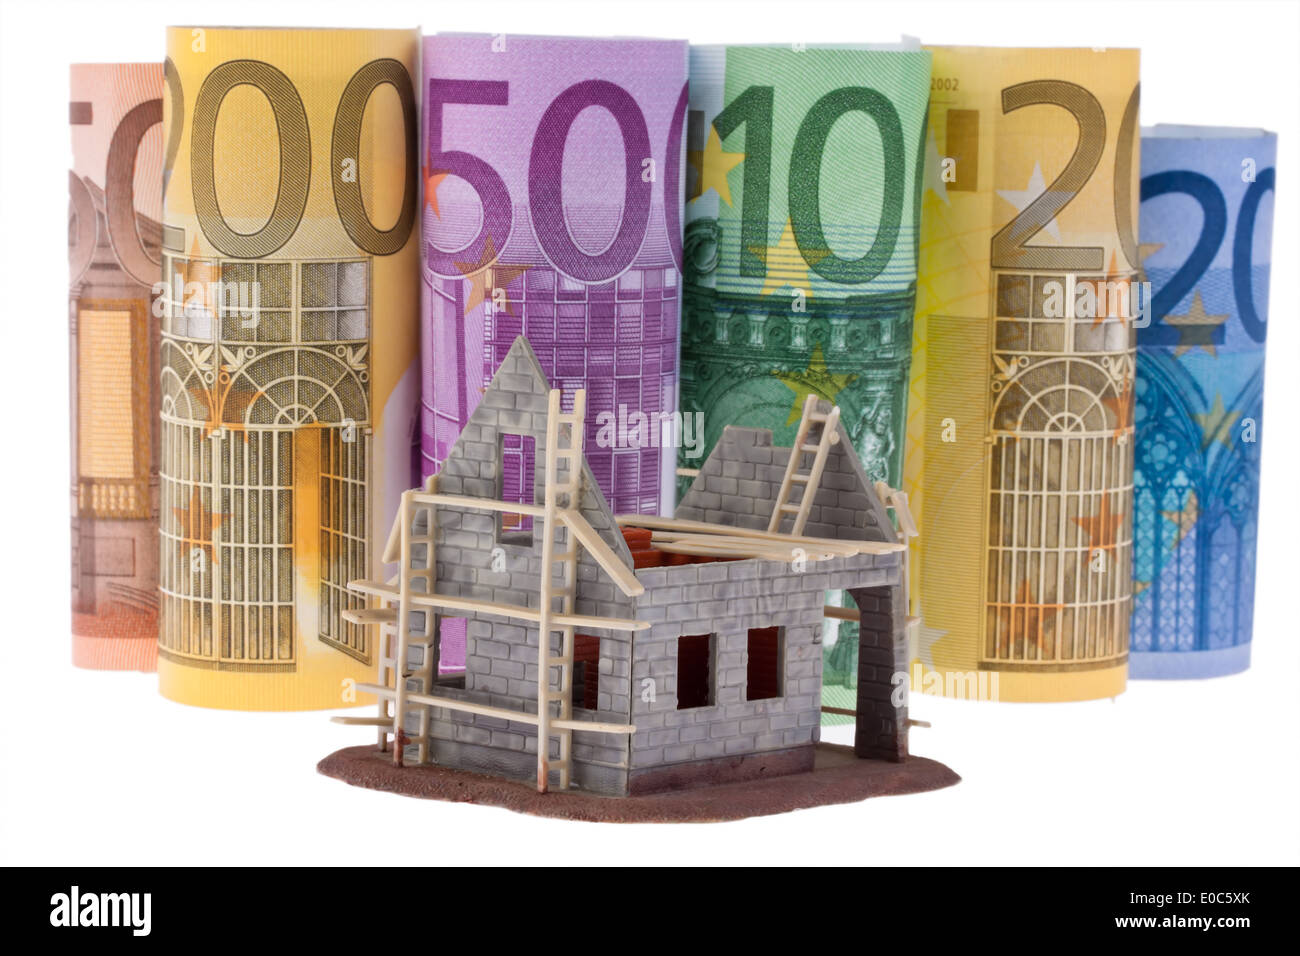 A lot of euro of bank notes with shell house, Viele Euro Geldscheine mit Rohbau Haus Stock Photo